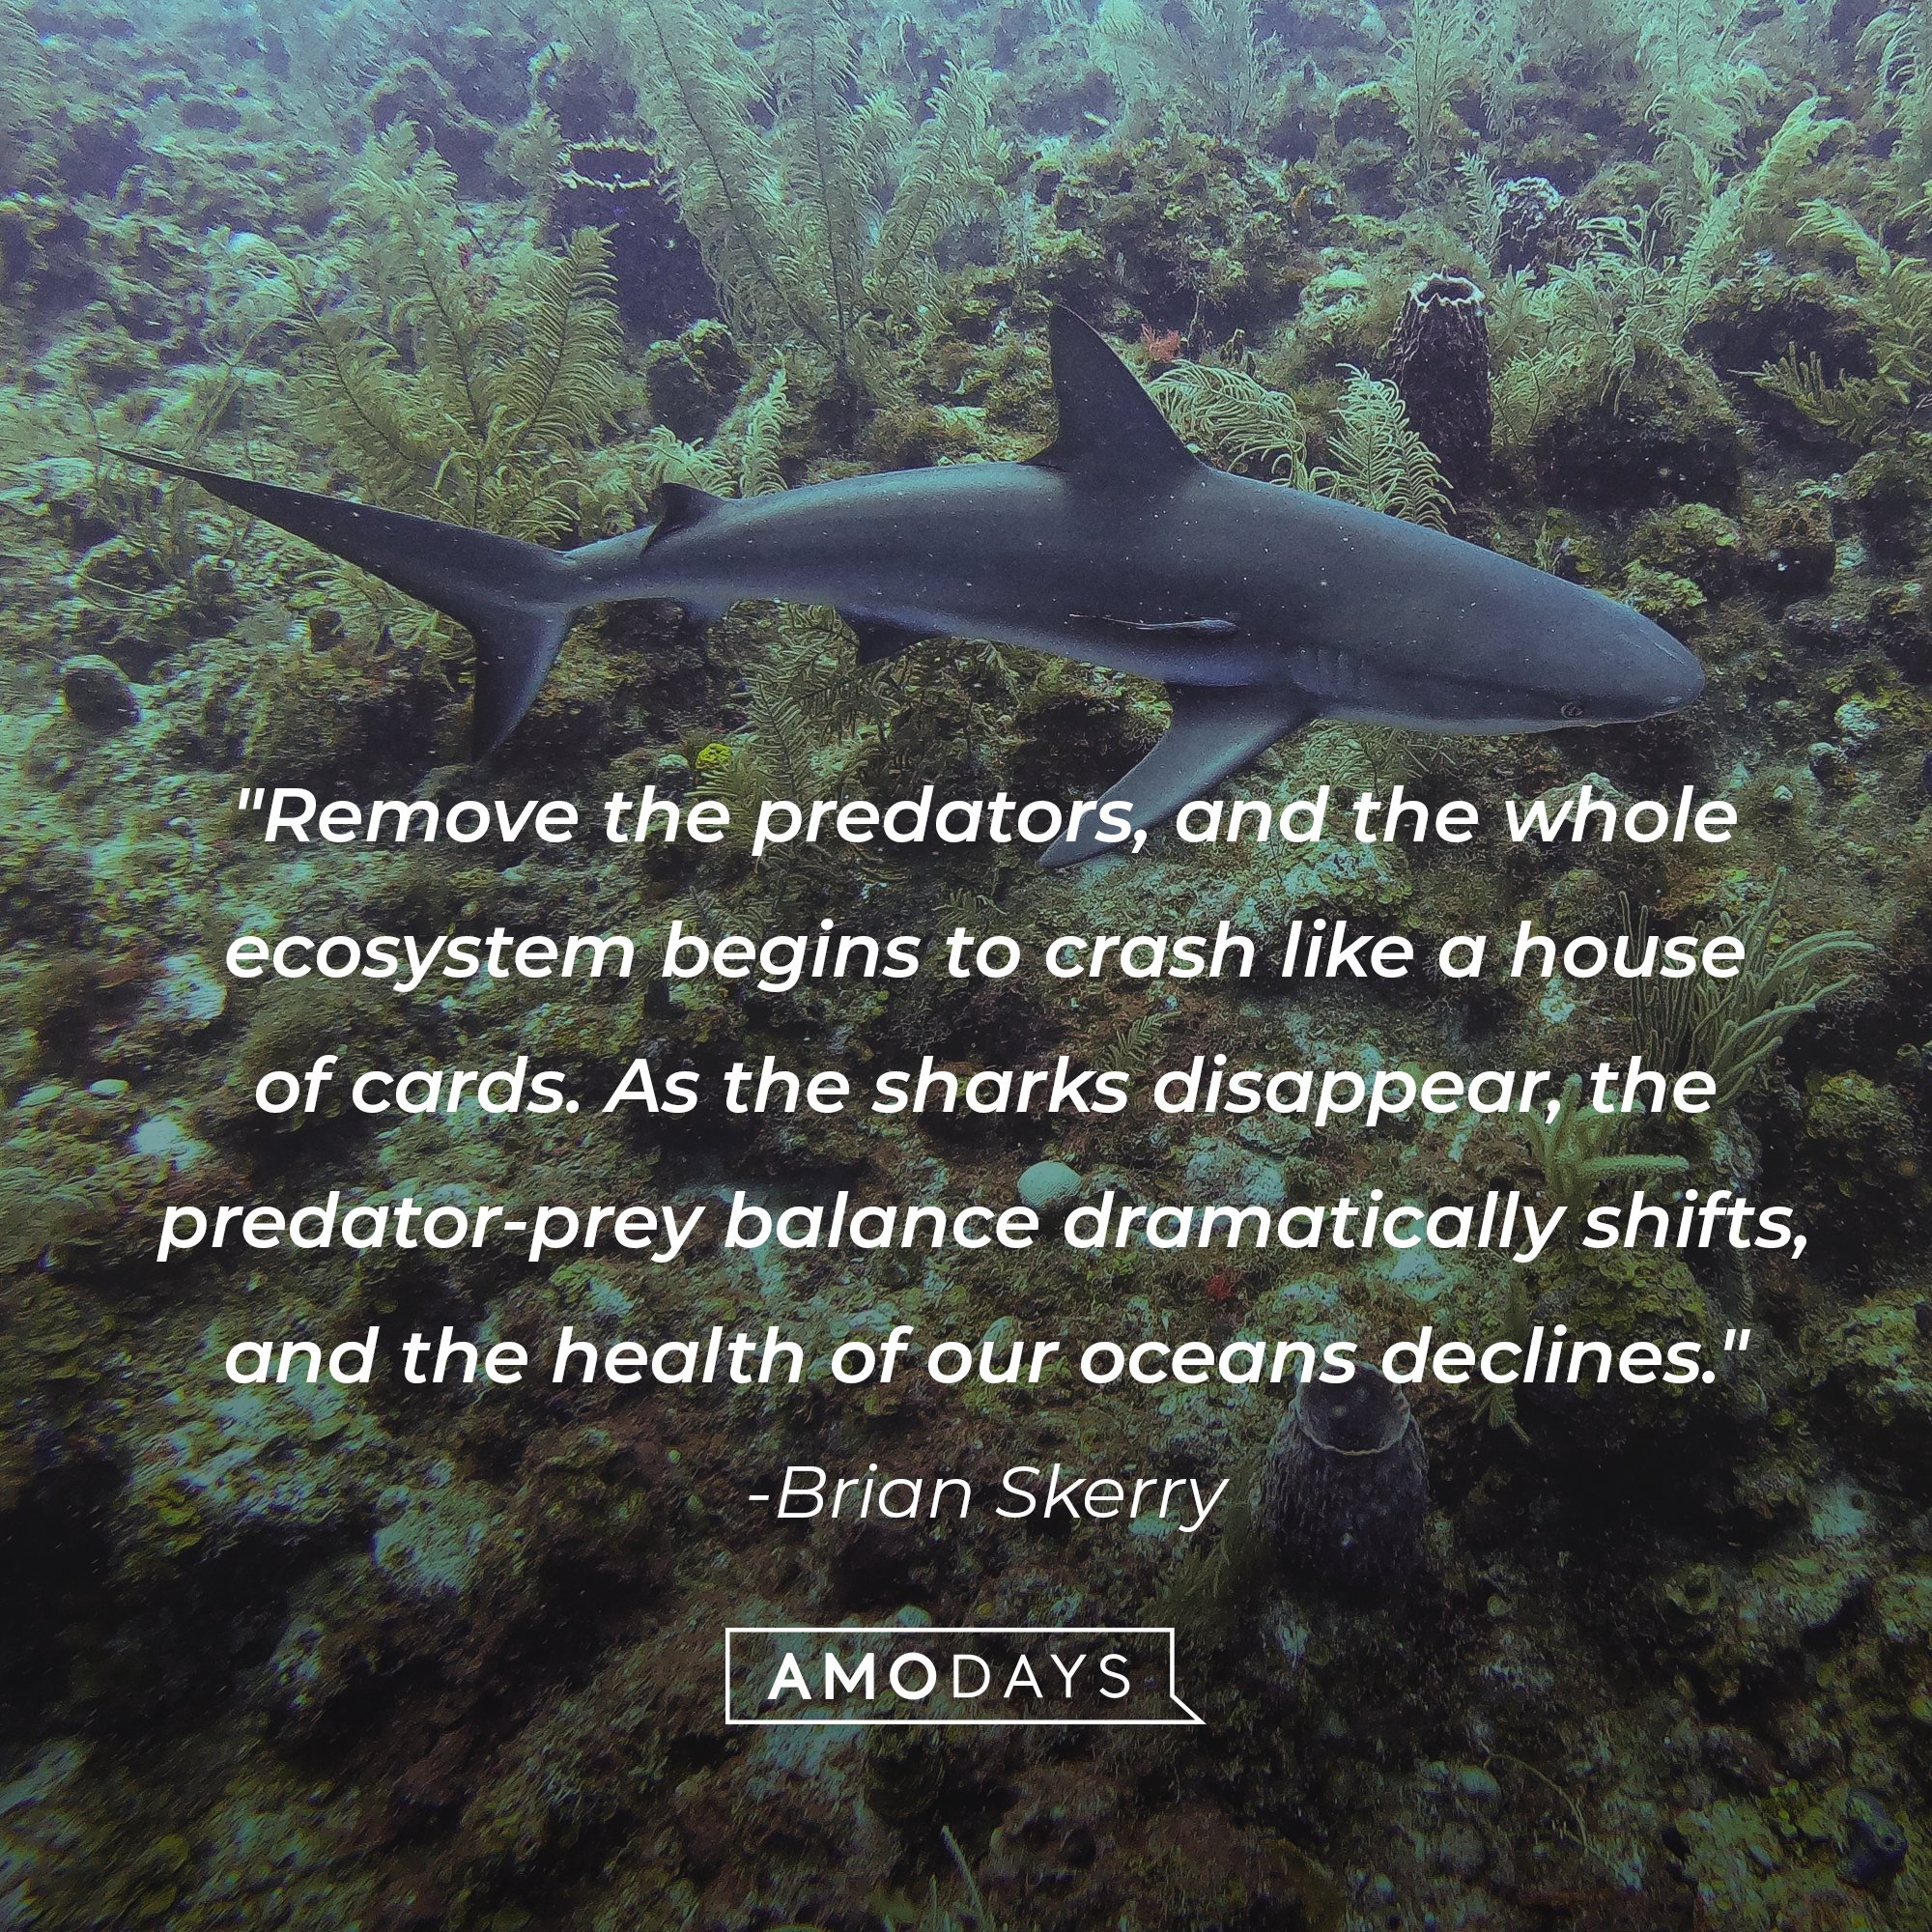 Brian Skerry's quote: "Remove the predators, and the whole ecosystem begins to crash like a house of cards. As the sharks disappear, the predator-prey balance dramatically shifts, and the health of our oceans declines." | Image: AmoDays